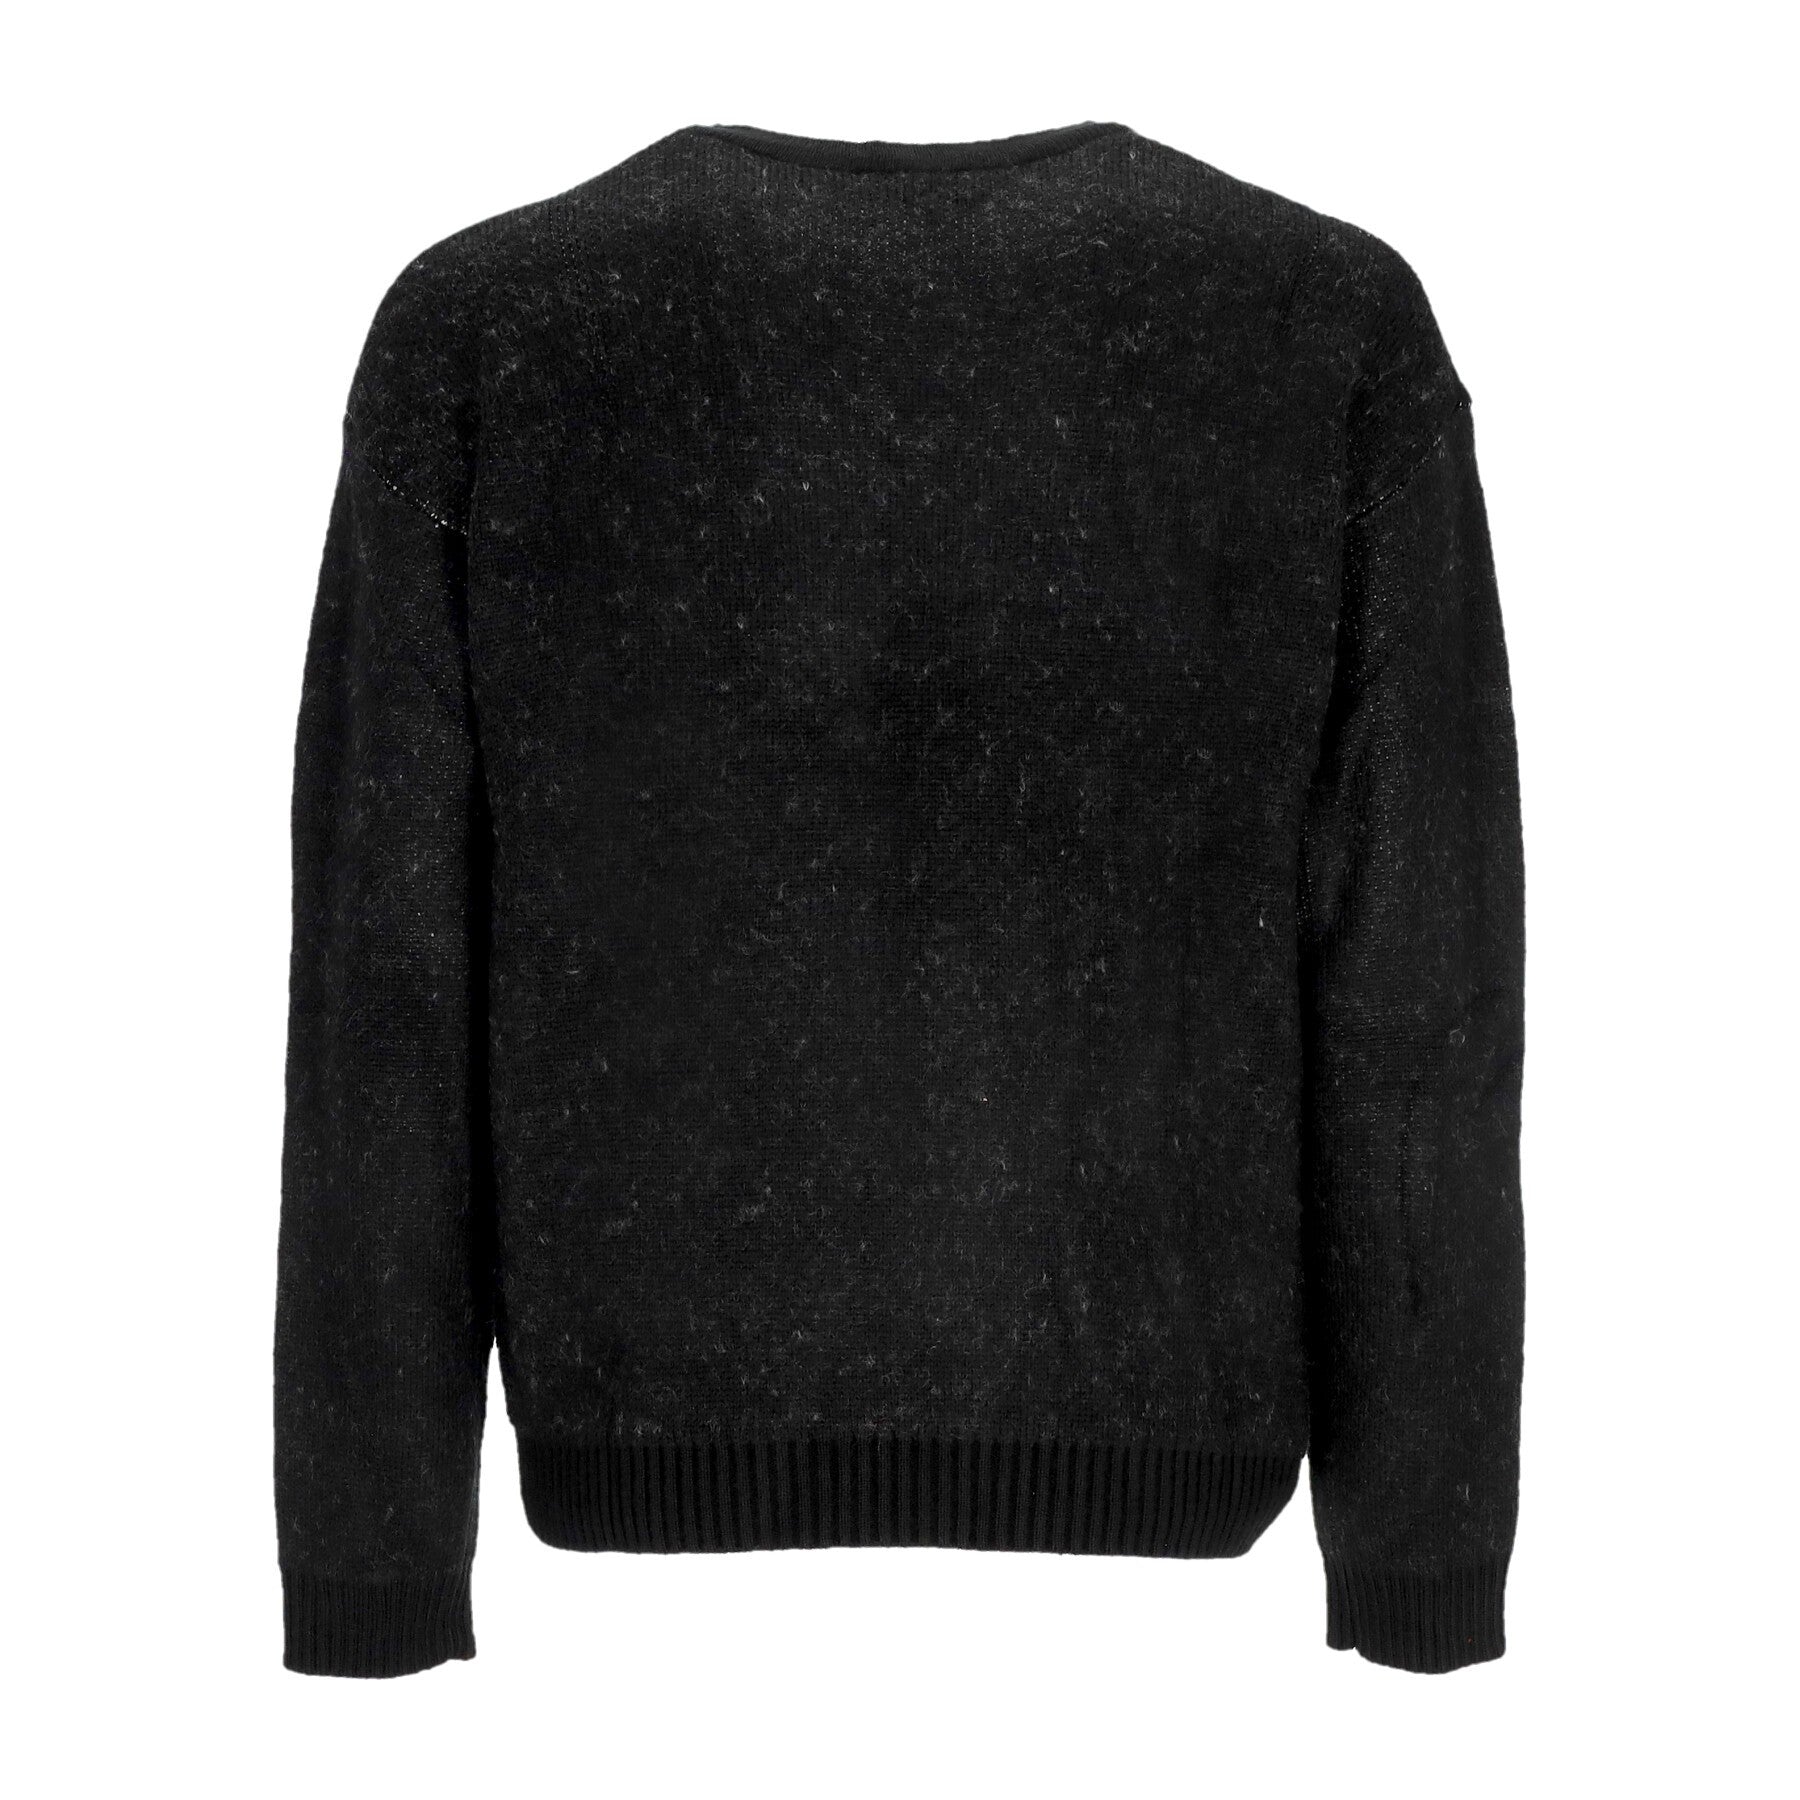 Usual, Maglione Uomo Usualism Sweater, 